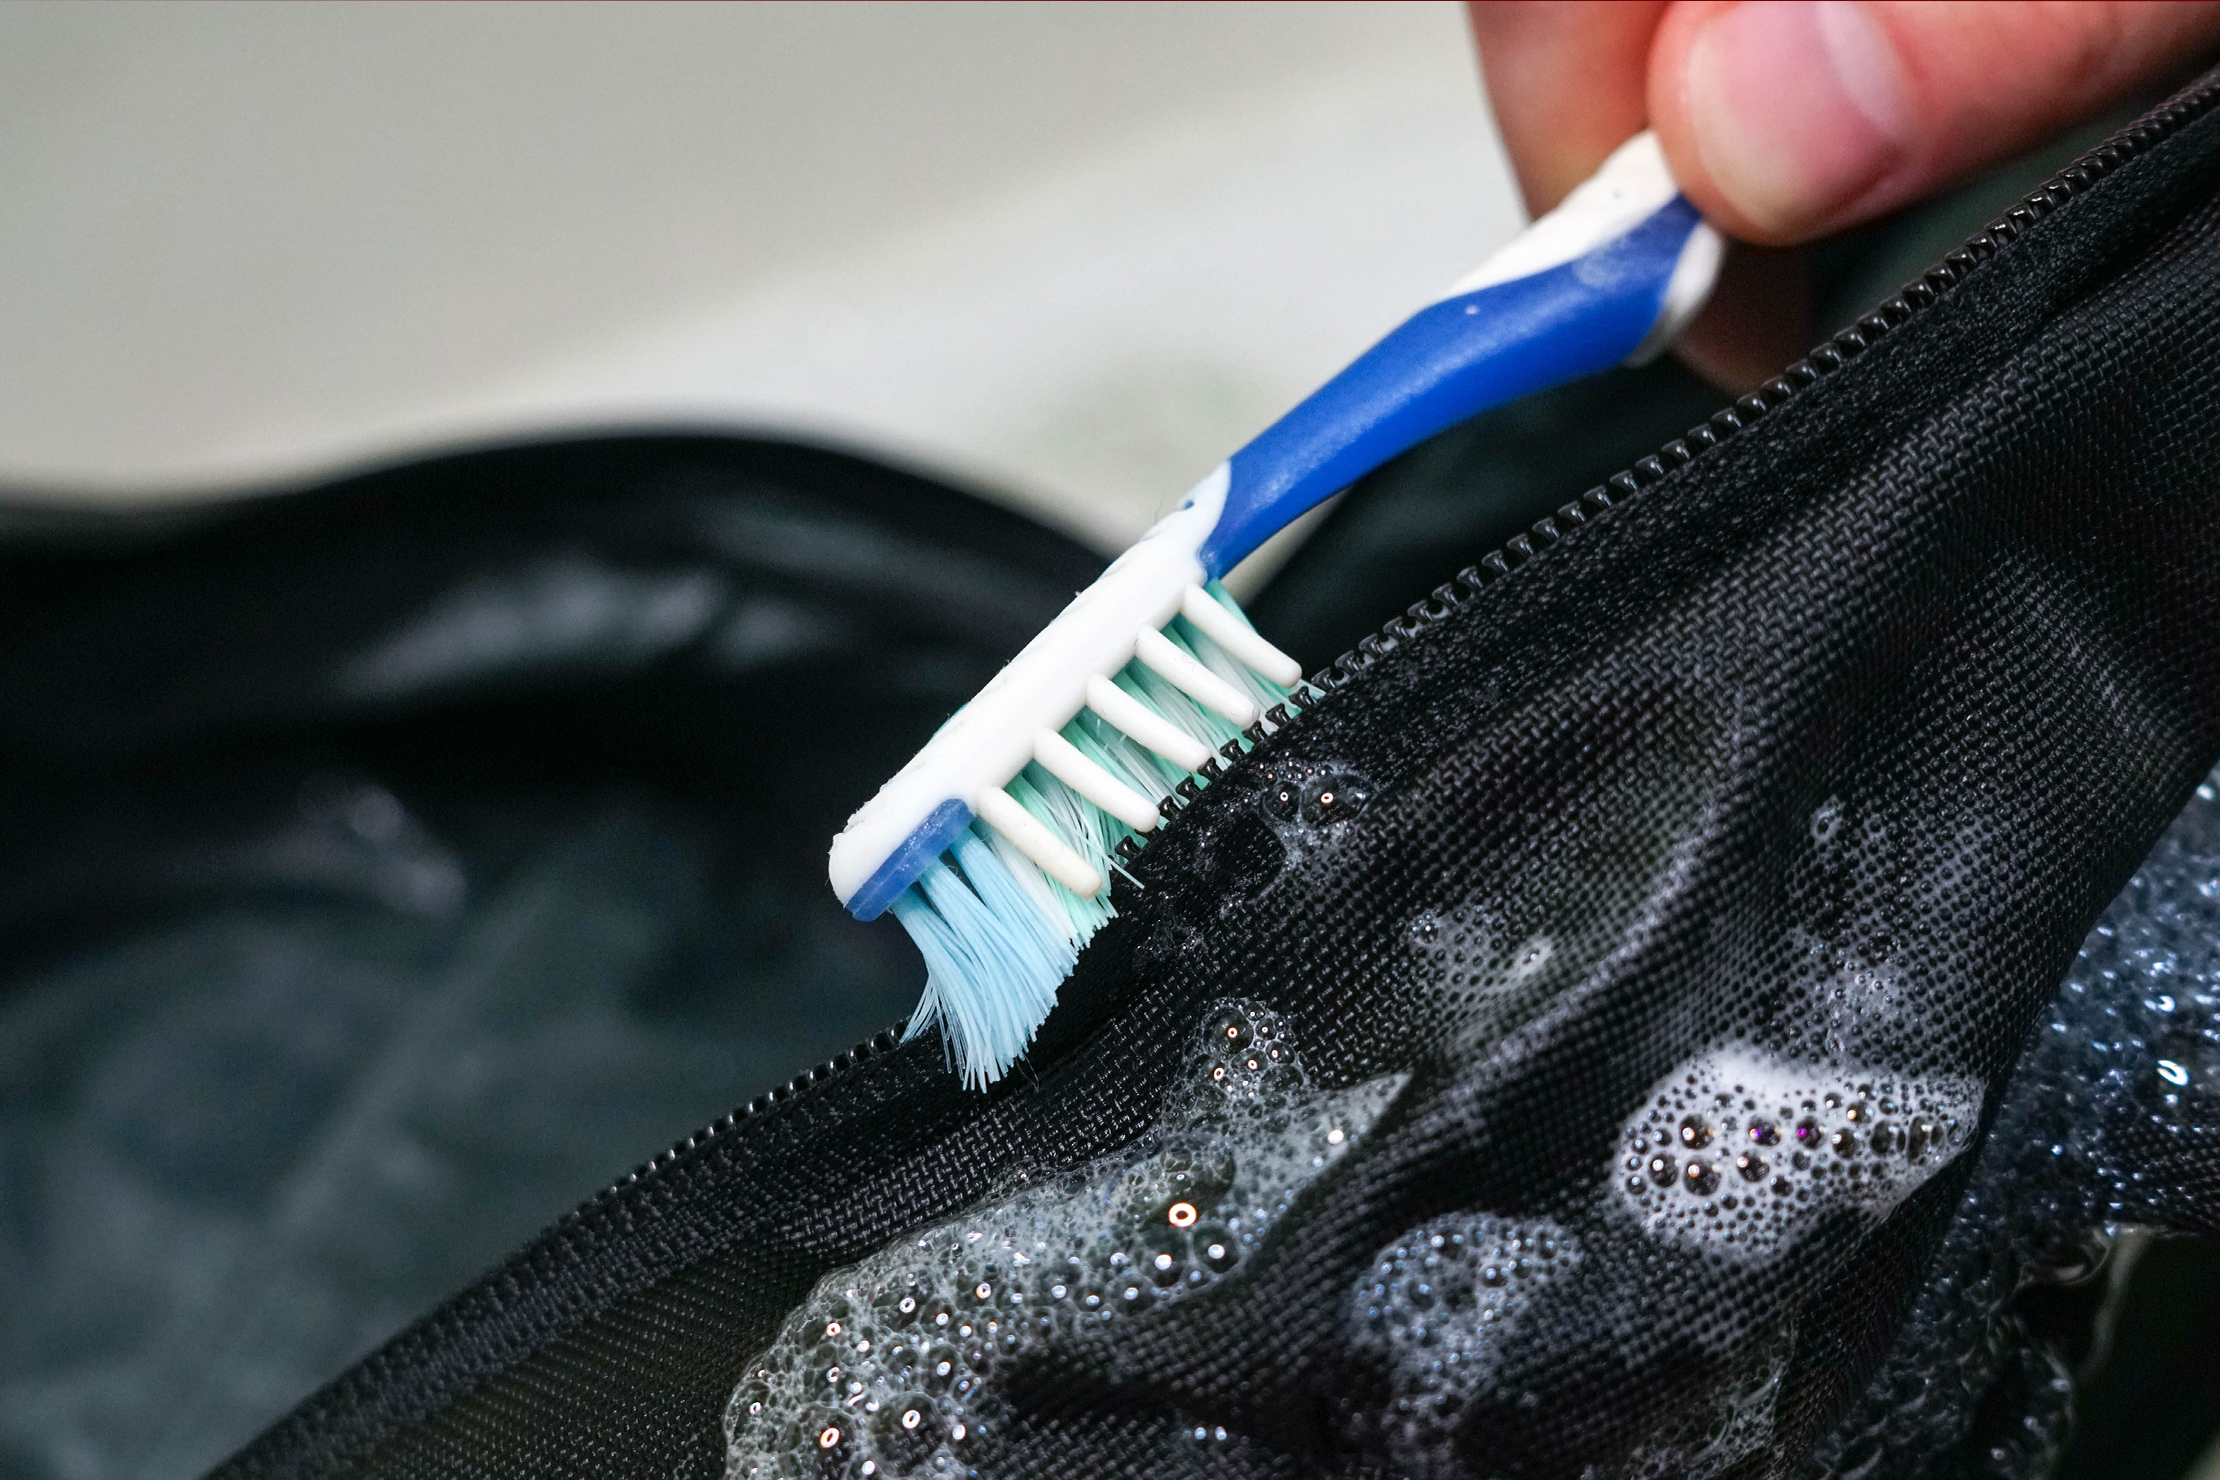 Scrubbing Zippers with Toothbrush